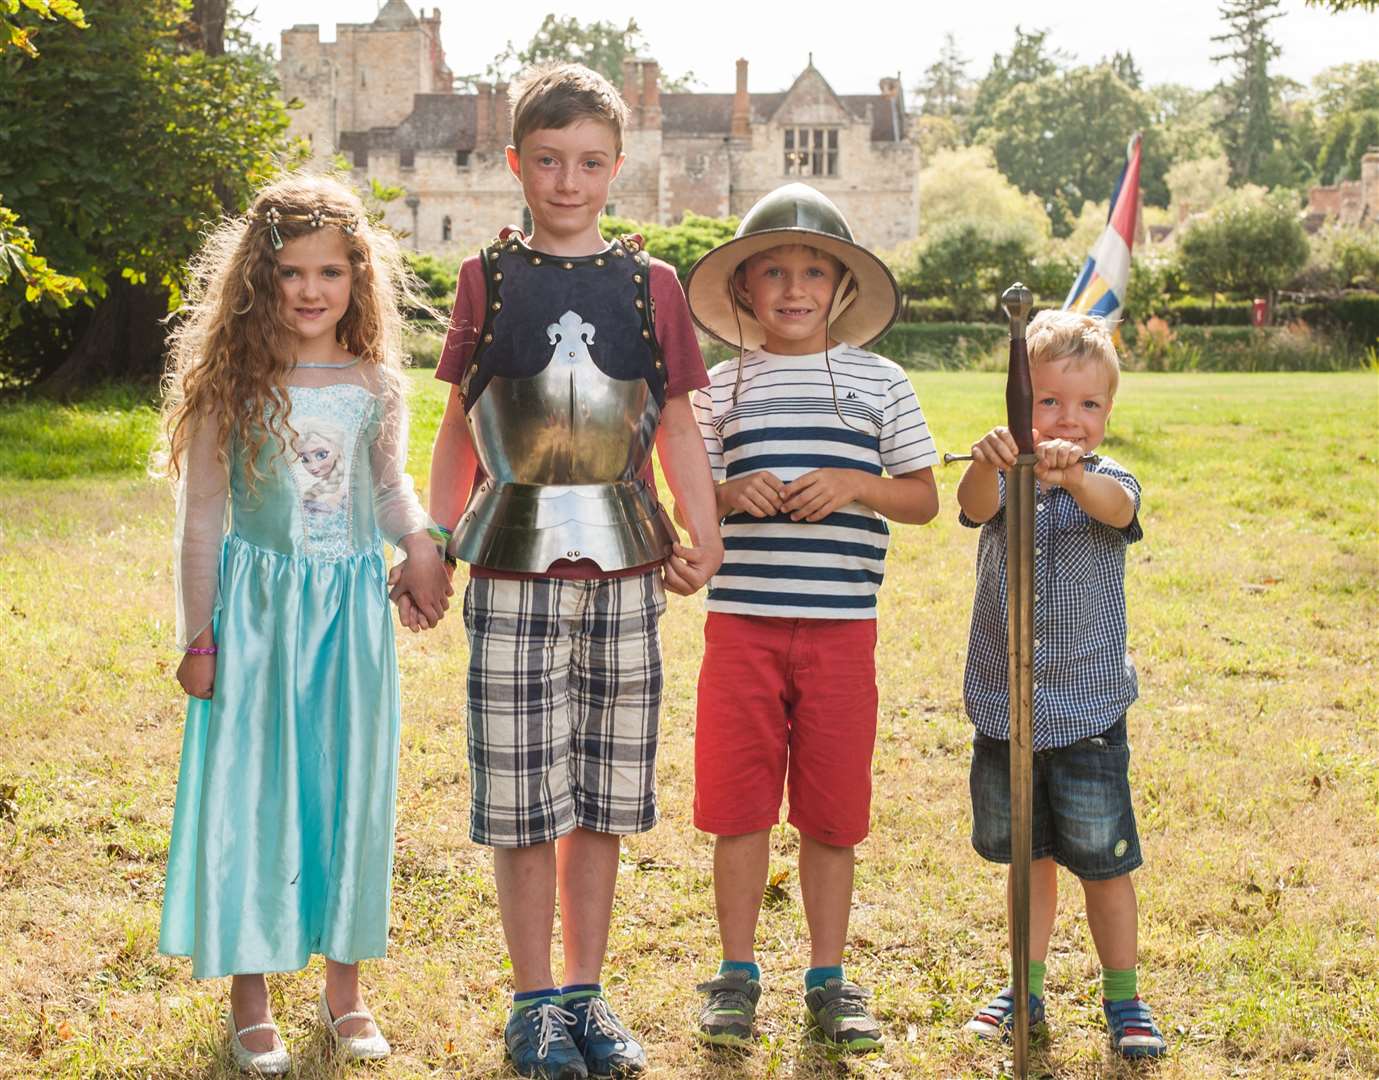 Knights and Princesses at Hever Castle Picture: Alison Bailey